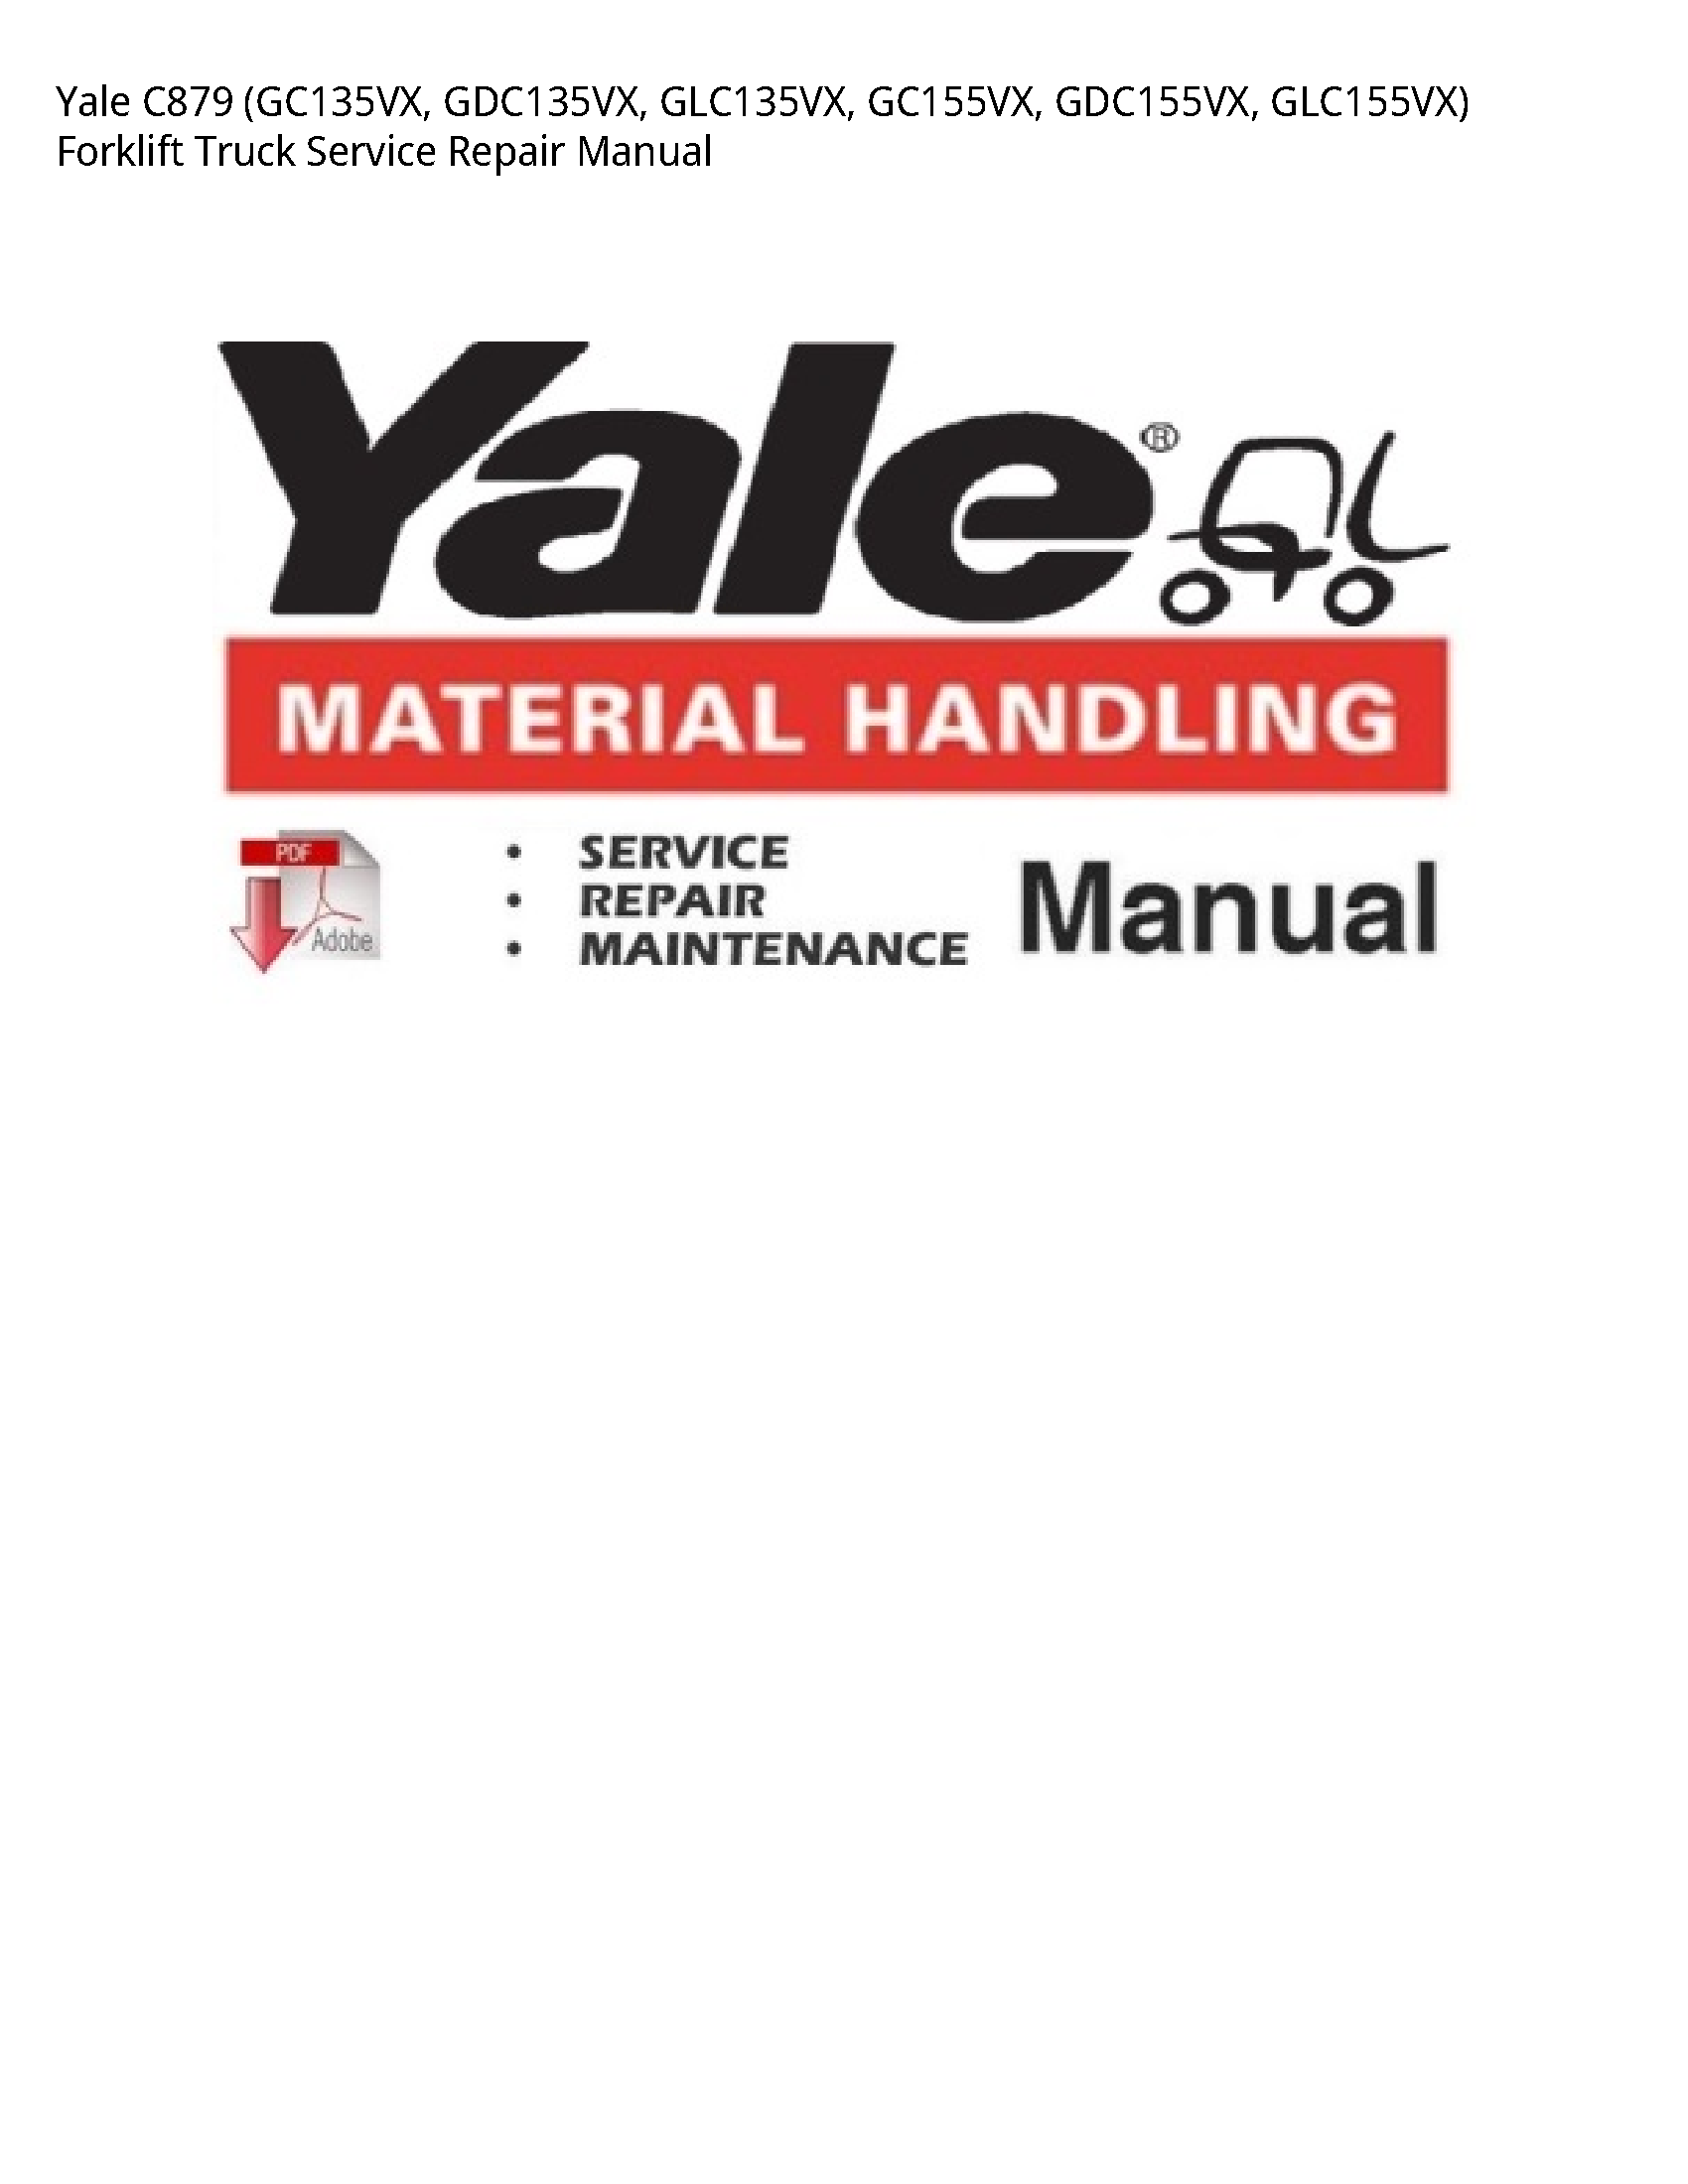 Yale C879 Forklift Truck manual